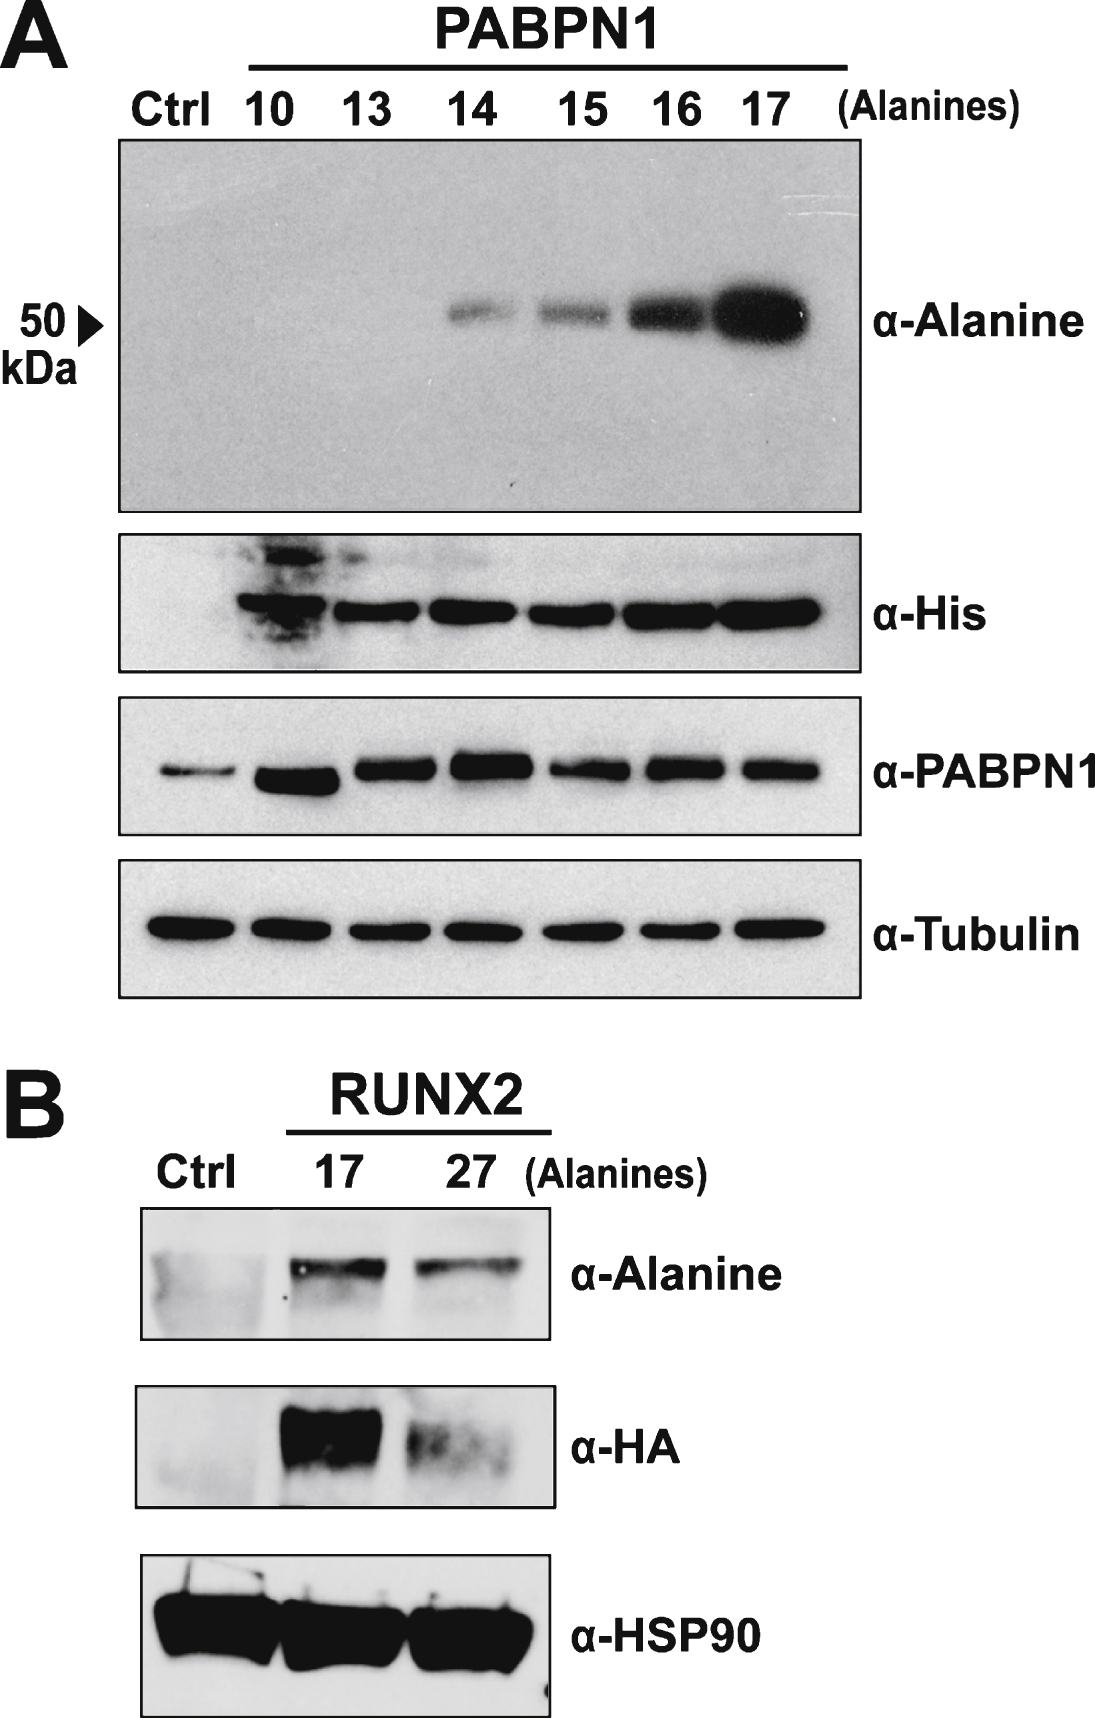 Specificity of the α-alanine antibody. A) Immunoblot of lysates from HEK 293 cells transfected with empty plasmid (Ctrl) or plasmid encoding His-tagged wild type (A10) PABPN1 or PABPN1 expanded to 13–17 alanines probed with the α-Alanine antibody. Blots were probed with α-His to confirm expression of recombinant protein and α-PABPN1 to detect PABPN1 protein. An α-Tubulin antibody was used to detect tubulin as a loading control. B) Immunoblot of lysates from untransfected HEK 293 cells (Ctrl) or HEK 293 cells transfected with pTL-1 plasmid encoding HA-tagged wild type (A17) RUNX2 or alanine-expanded (A27) RUNX2 probed with the α-Alanine antibody. Blots were probed with α-HA to confirm protein expression and α-HSP90 was used to detect HSP90 as a loading control.